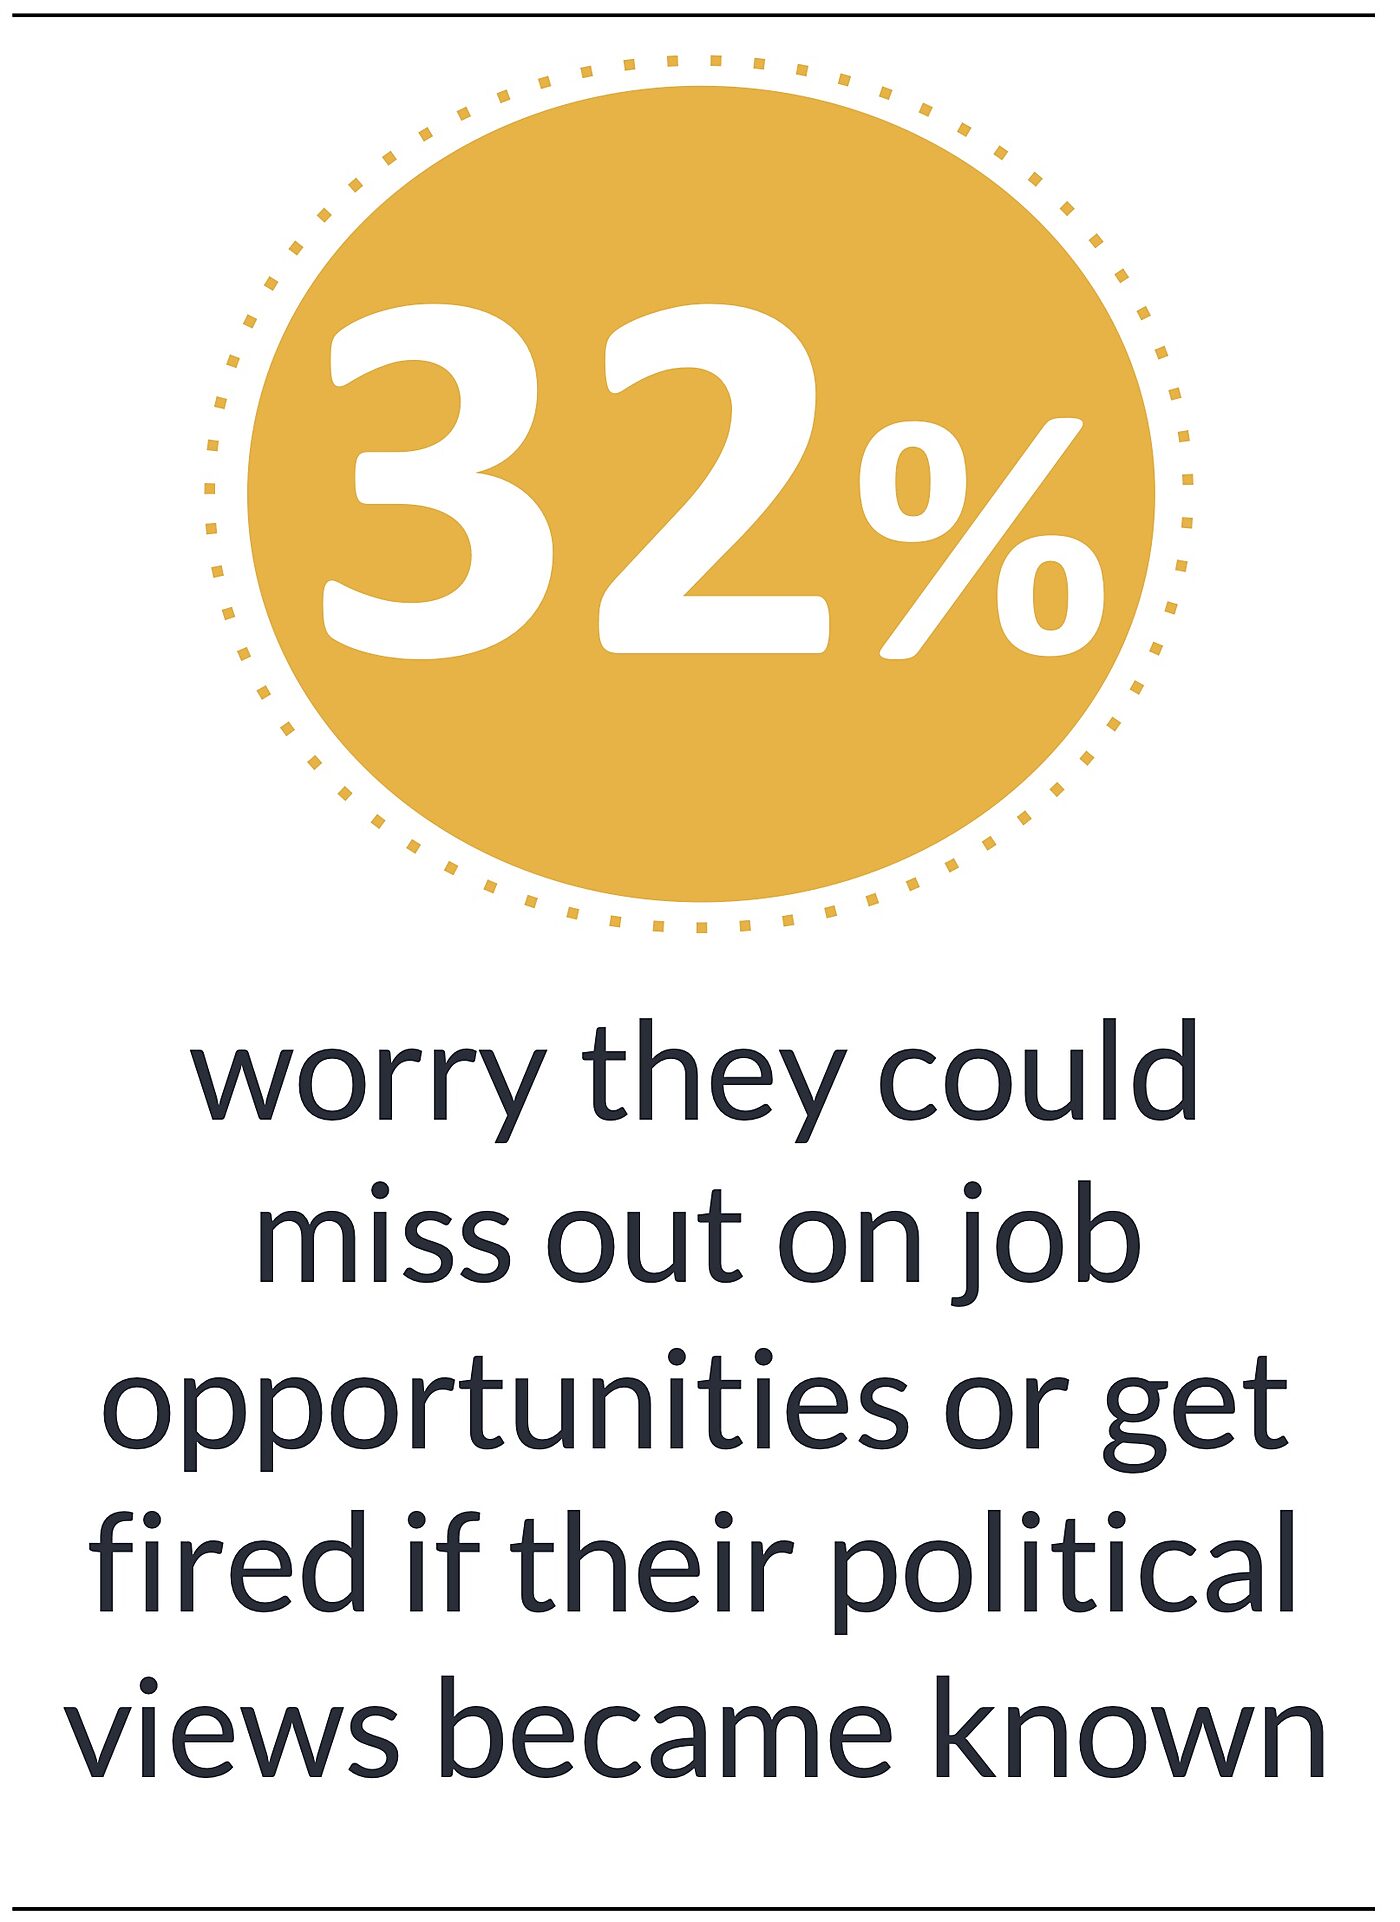 32% worry they could  miss out on job opportunities or get fired if their political views became known